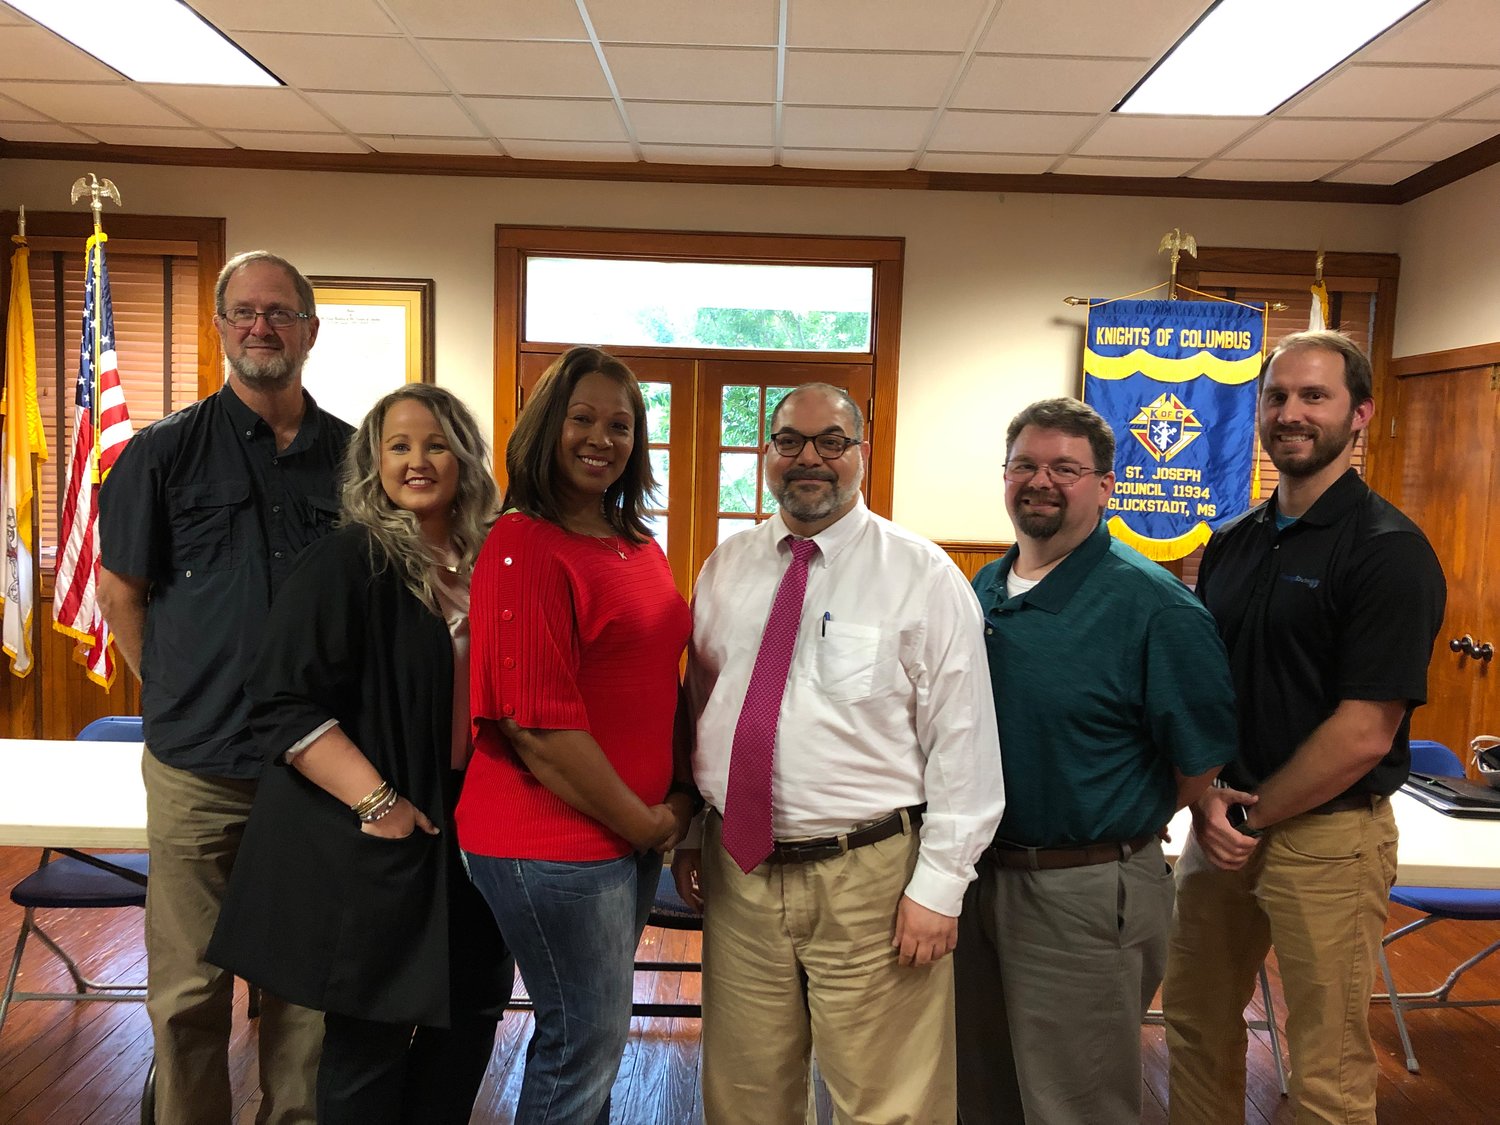 Newly-appointed Gluckstadt Planning and Zoning Commission Board members stand together after the conclusion of the special Gluckstadt meeting on July 19. Pictured, from left: Tim Slattery, Melanie Greer, Katrina Myrick, David Boackle, Lee Drake, and Andrew Duggar. Not pictured is Sam McGaugh.